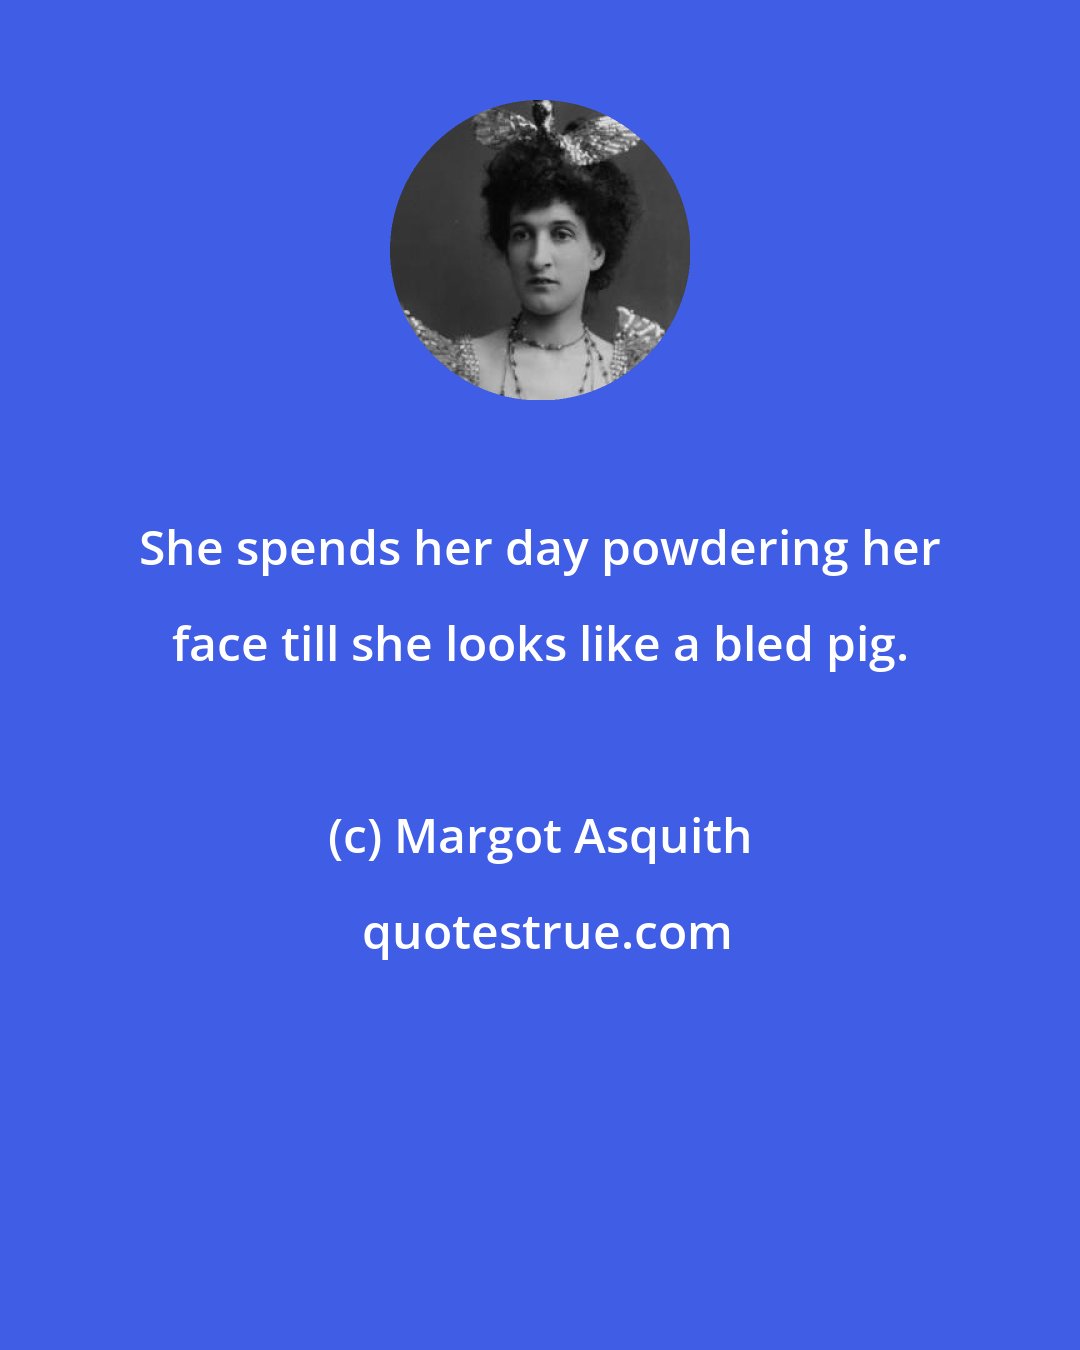 Margot Asquith: She spends her day powdering her face till she looks like a bled pig.